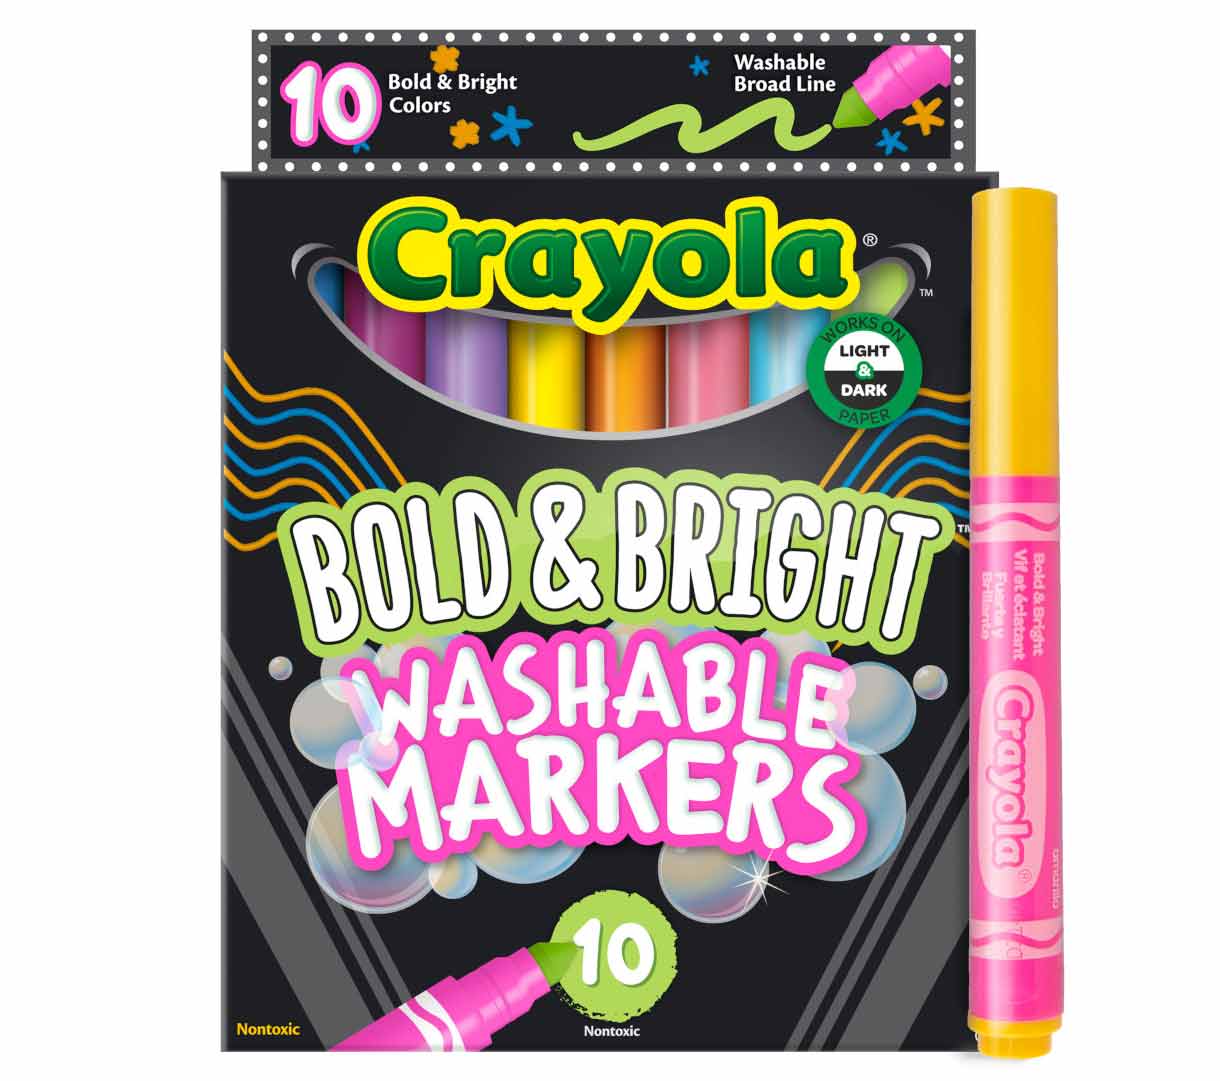 Crayola® Broad Line Bold Bright Color Markers, 10 ct - Harris Teeter